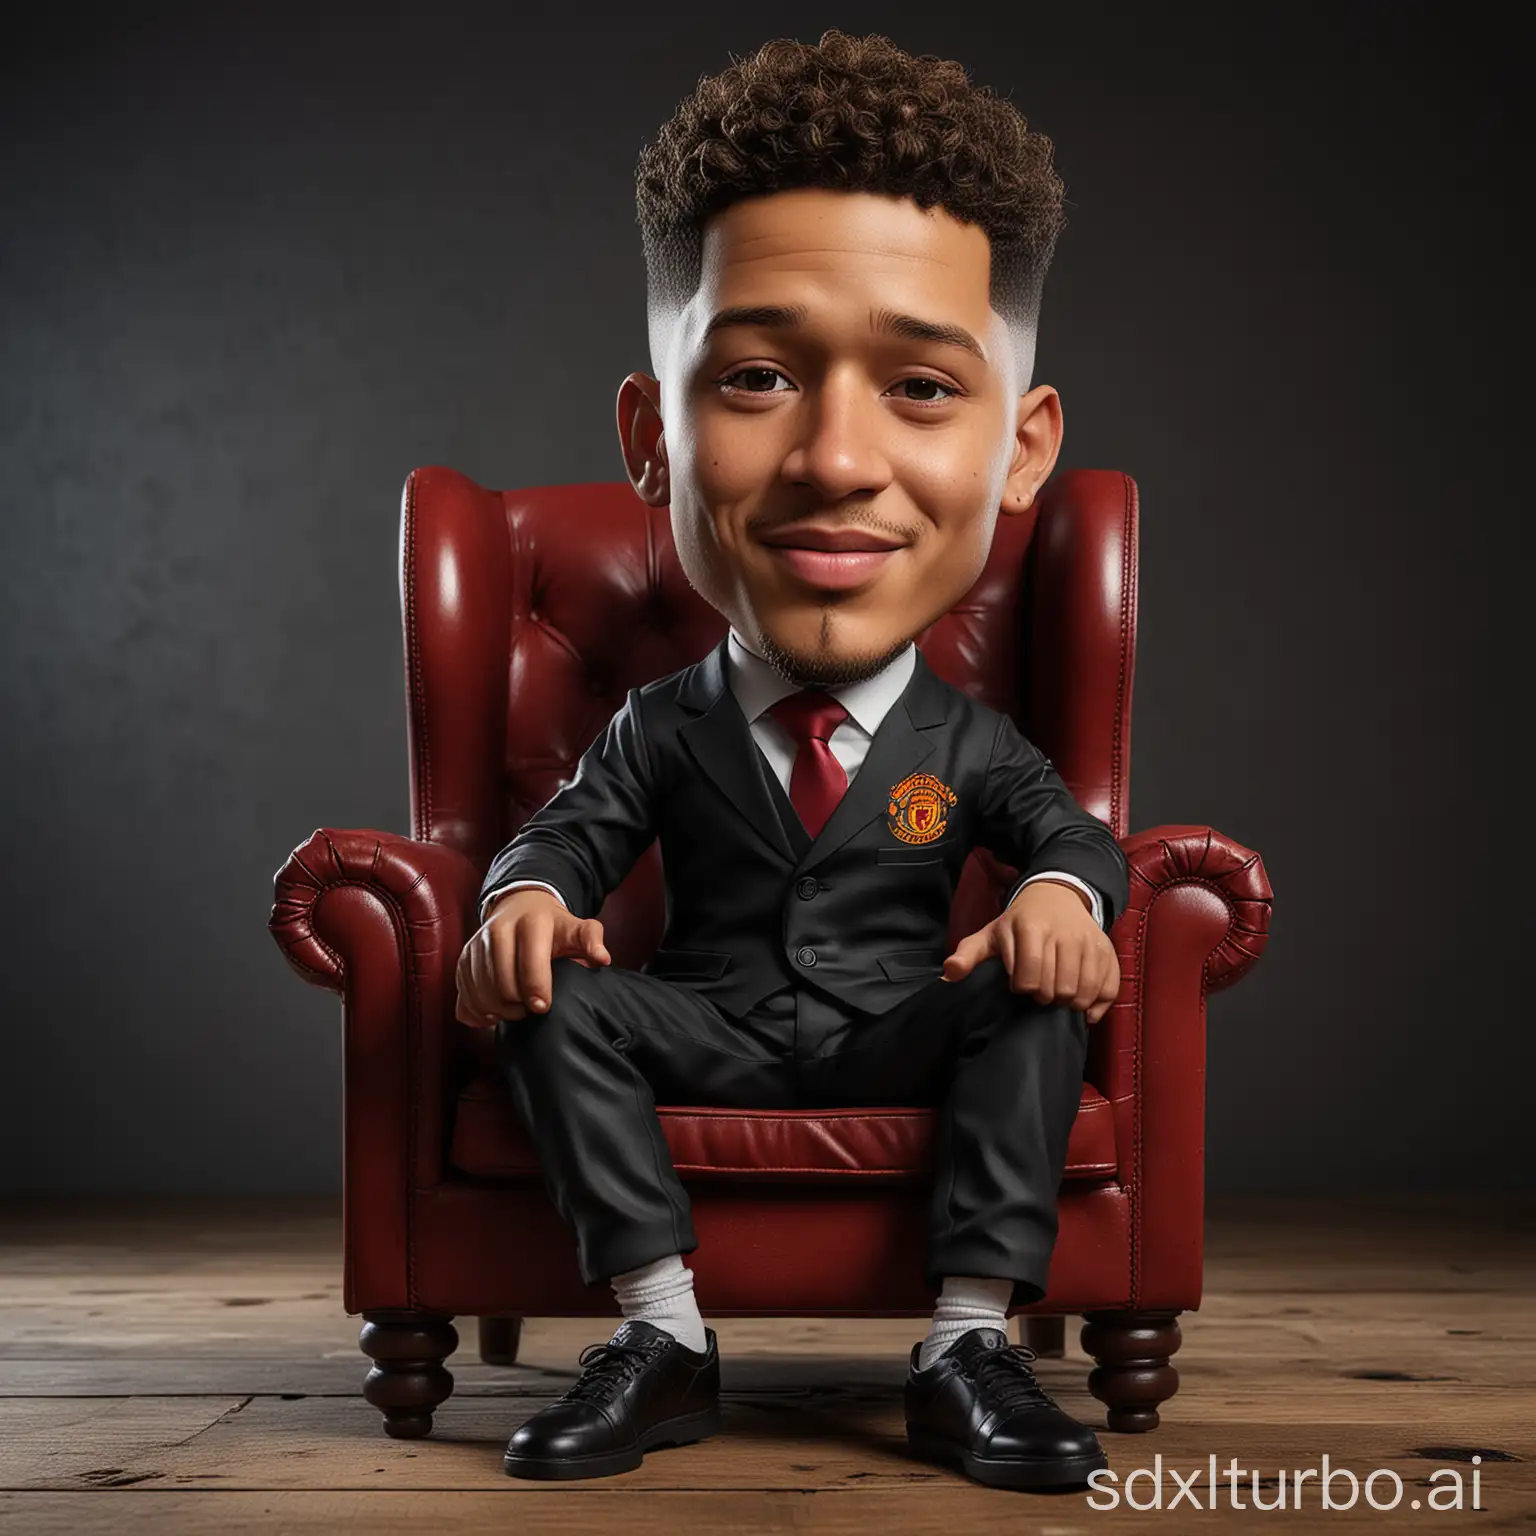 Create a realistic full body caricature with a large head. jadon sancho, is sitting relaxed in a sofa chair with a dark red wing back, the texture of the wood is clearly visible. Wearing a black suit with red tie manchester united, wearing black shoes. on side there is many football trophy, The background should contrast with the color of the chairs and clothes, there by enhancing the overall composition of the picture. Use soft photographic lighting, dramatic overhead lighting, very high image quality, clear character details, UHD, 16k.